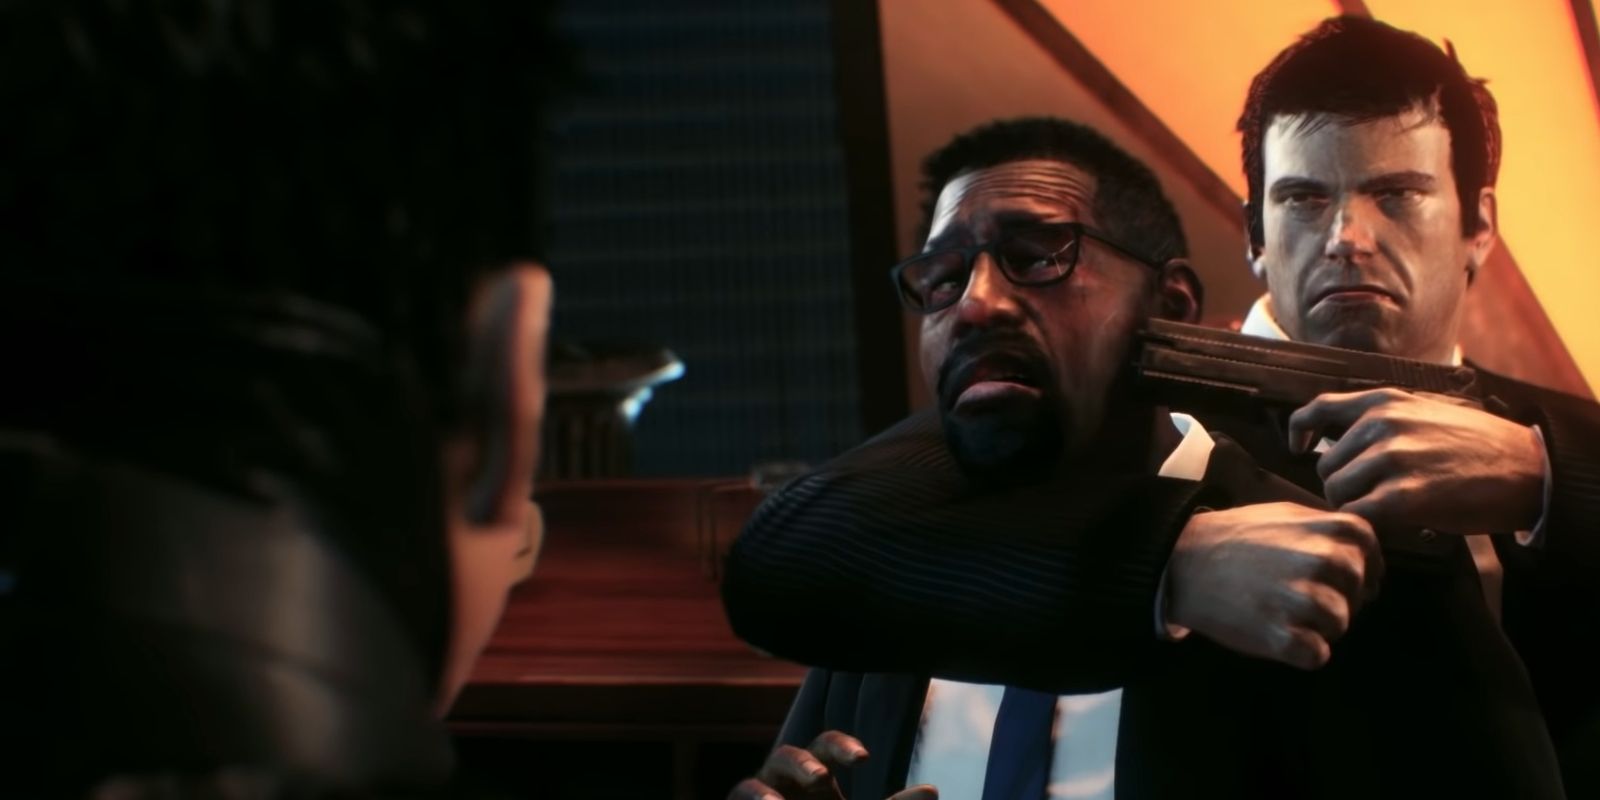 Hush holding Lucius Fox hostage while confronting Bruce Wayne in Batman Arkham Knight